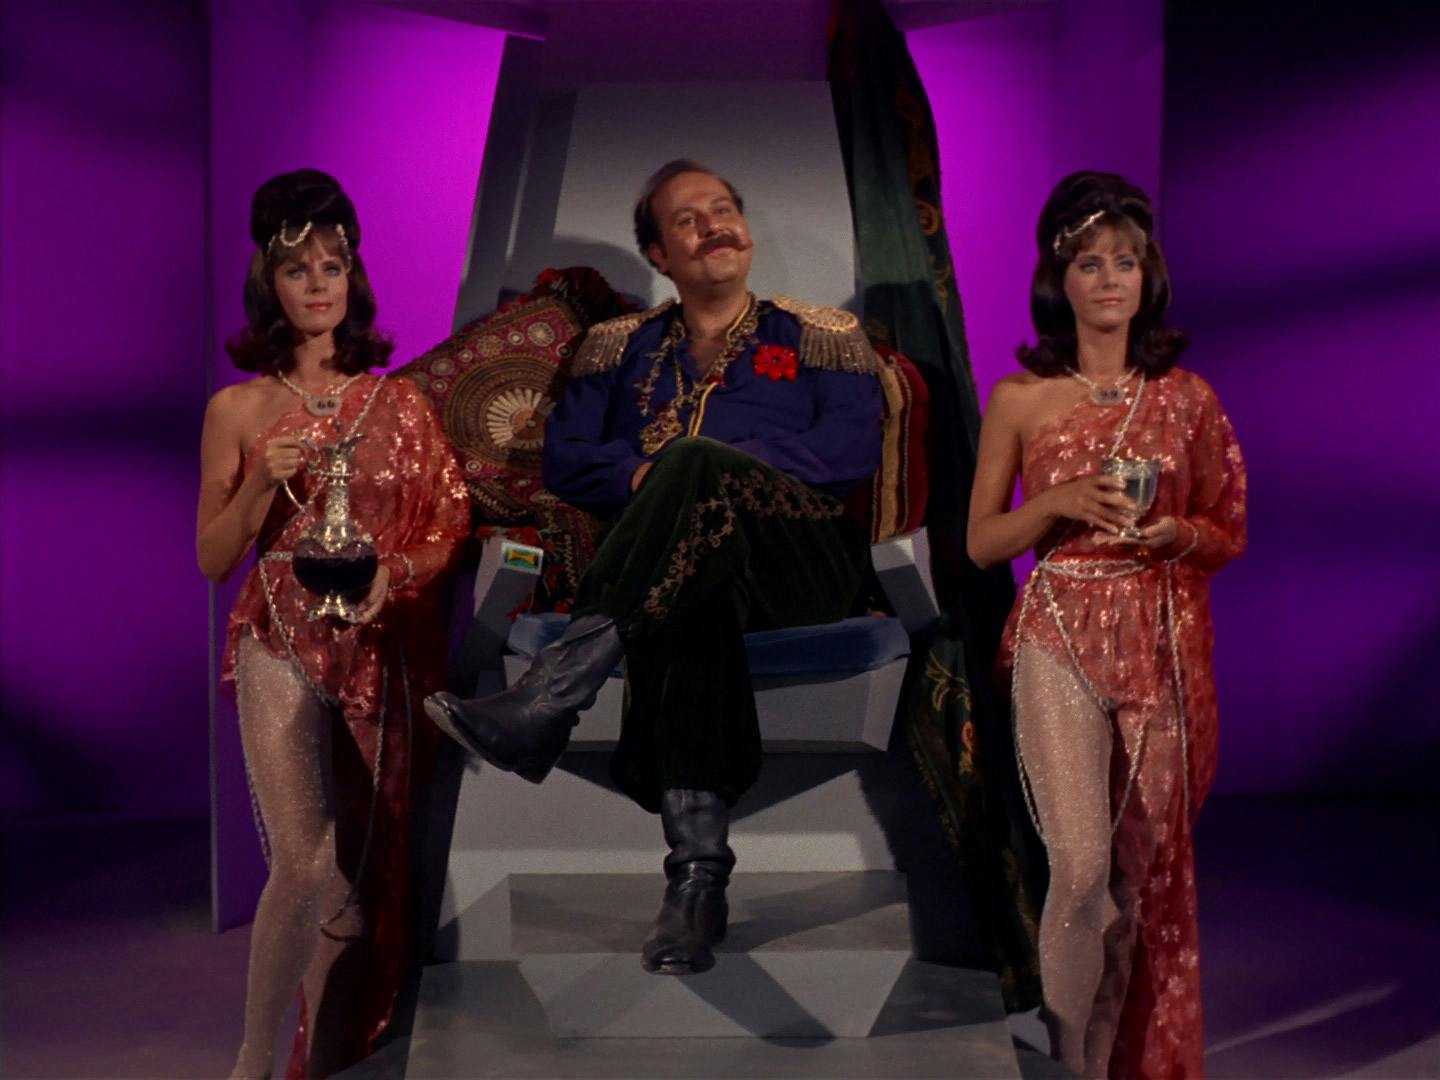 Harry Mudd sits on a throne as ruler of an android planet and flanked by two women servants by his side in 'I, Mudd'